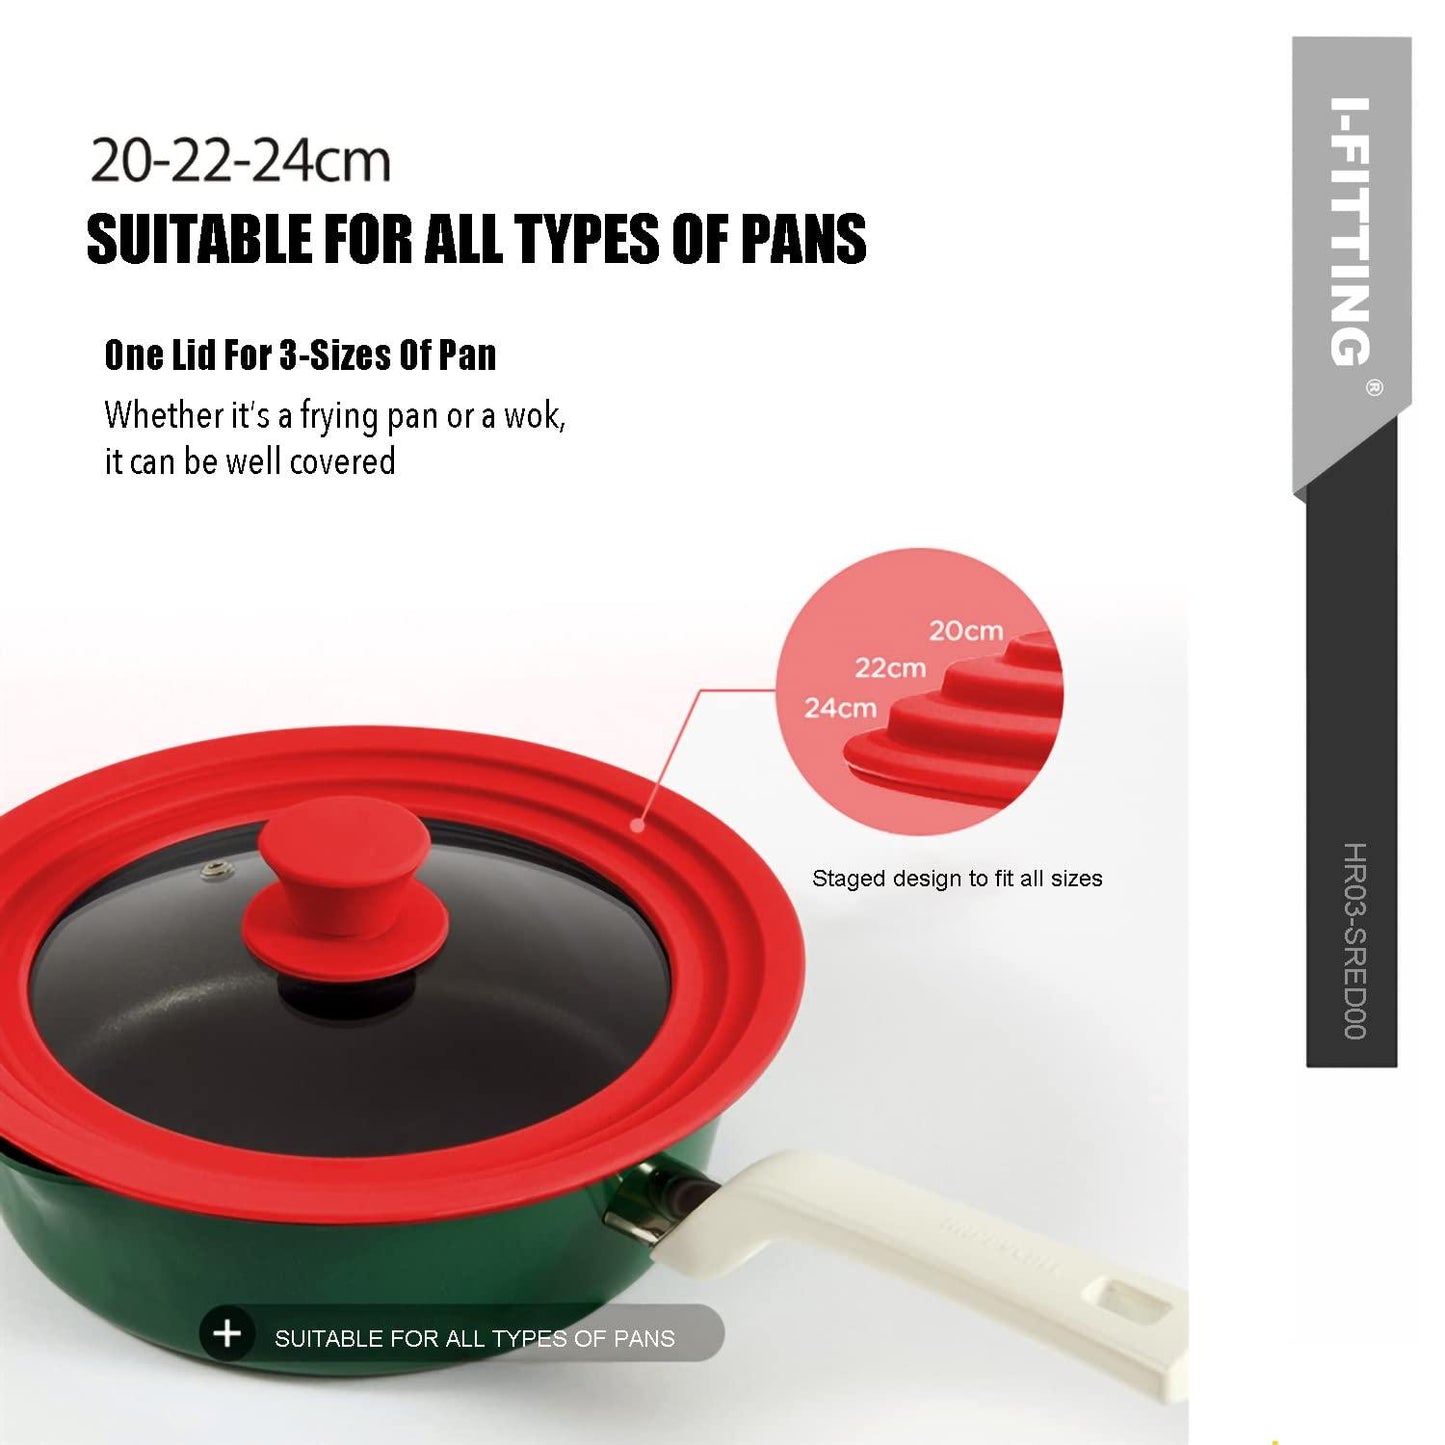 Universal Lid for Pot,Pan,Skillet Fits 6.5",7",8" Cookware Silicon lid Dishwasher Safe, Replacement Lid Vented Tempered Glass with Heat Resistant Silicone Rim By HR Huare Technology, Red,1 Pack - CookCave